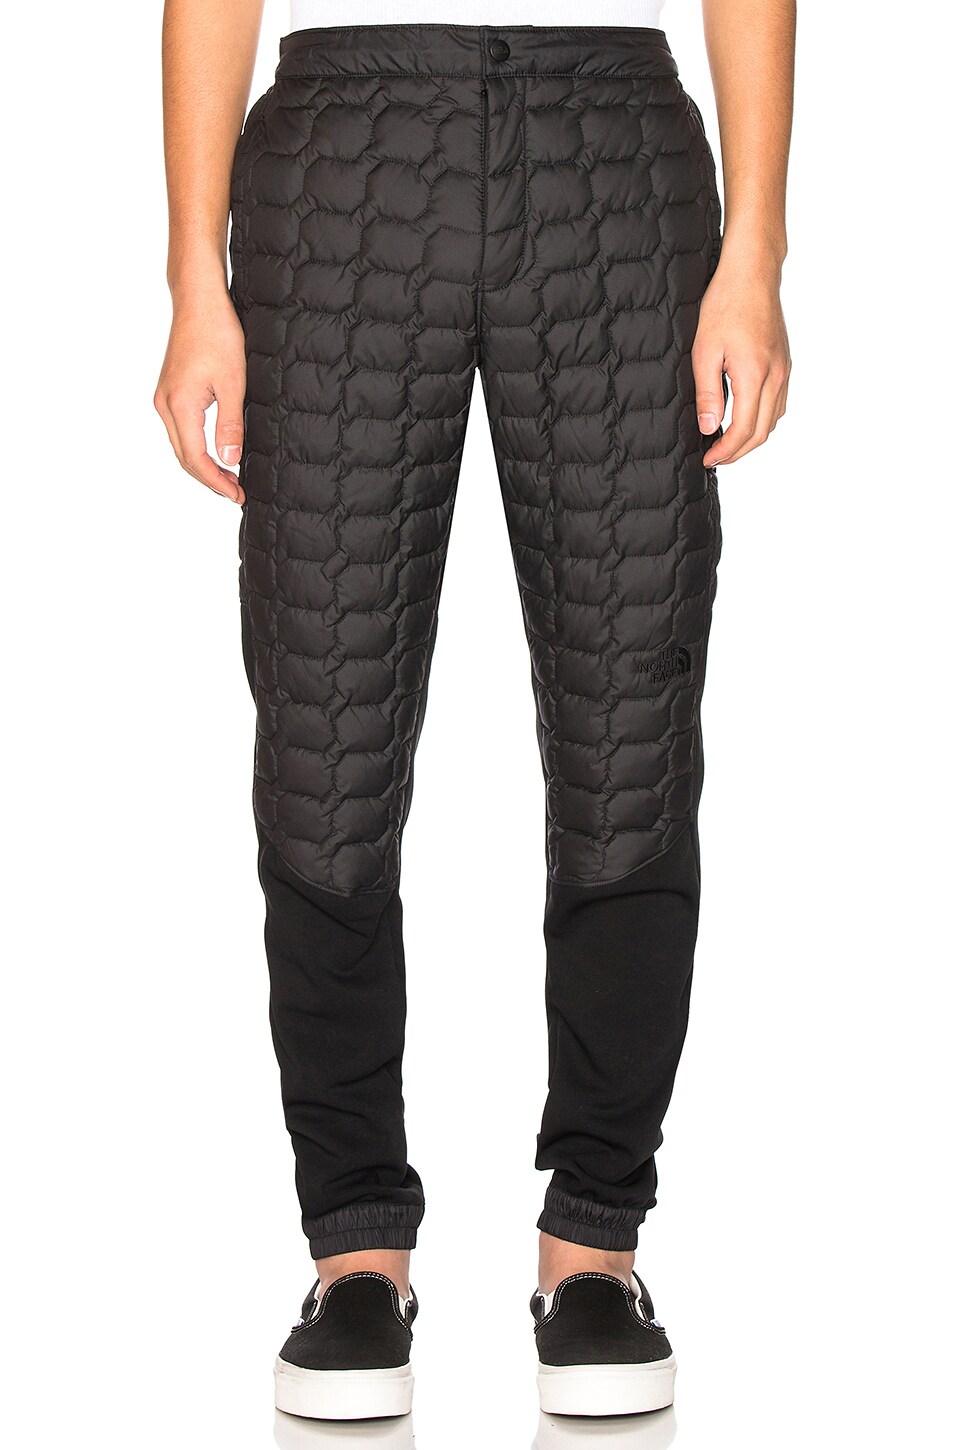 The North Face ThermoBall Insulated 